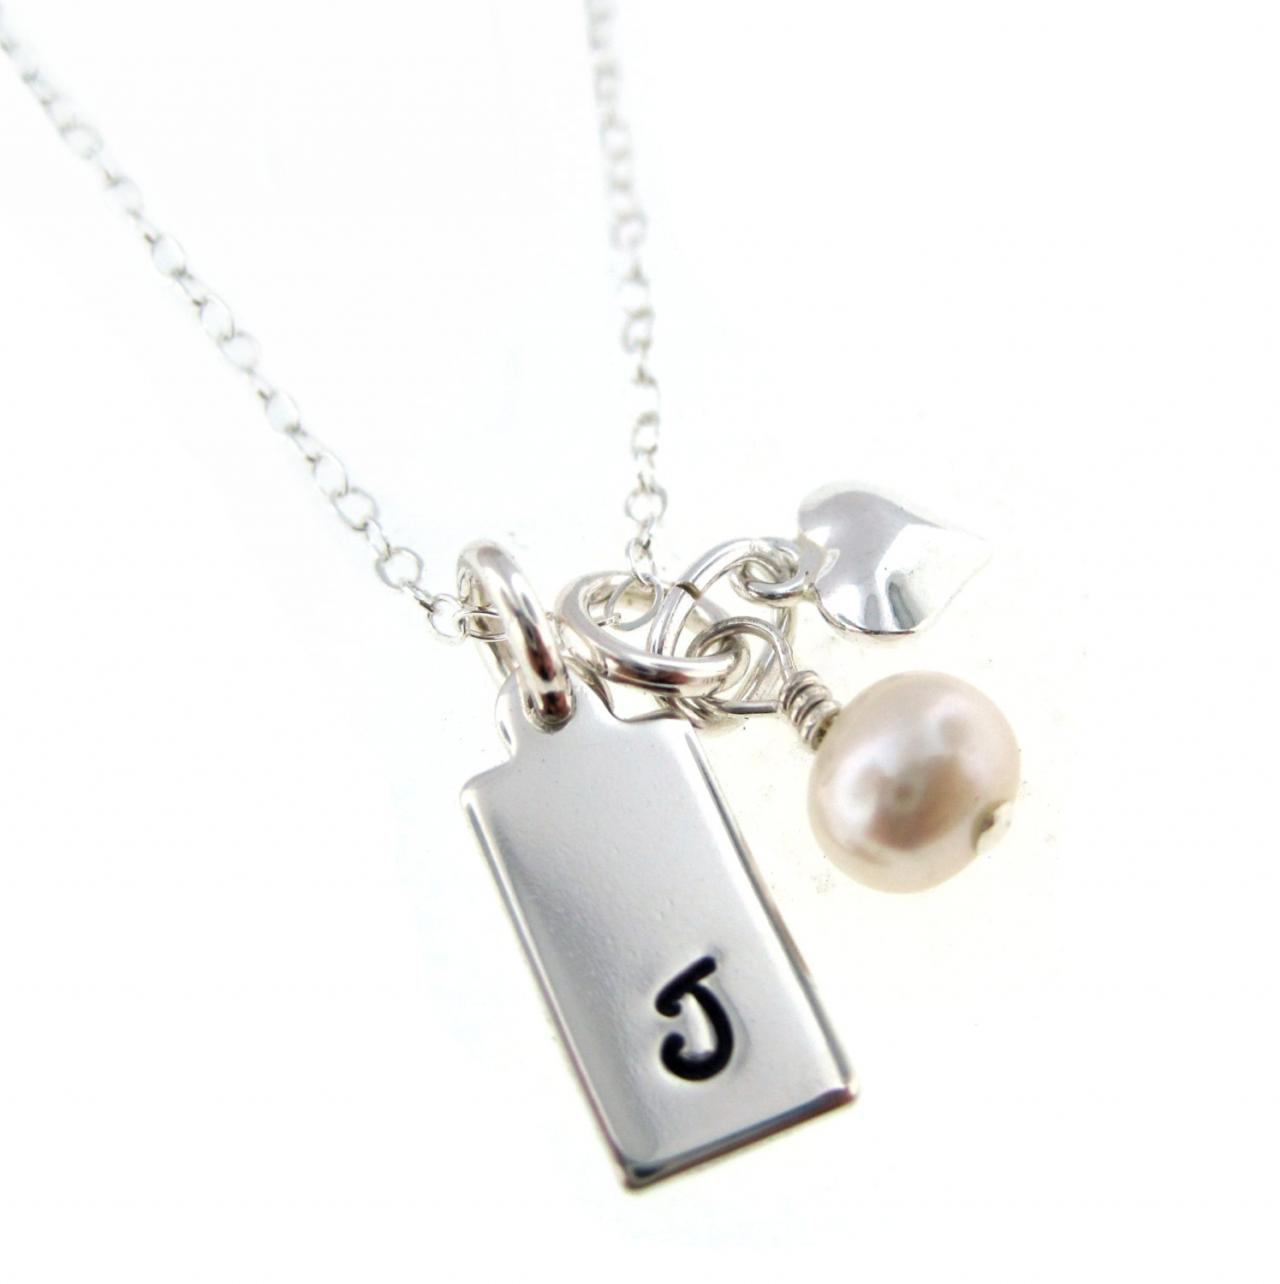 Simple And Elegant Personalized Initial Necklace - Sterling Silver Hand Stamped Jewelry By Hannah Design